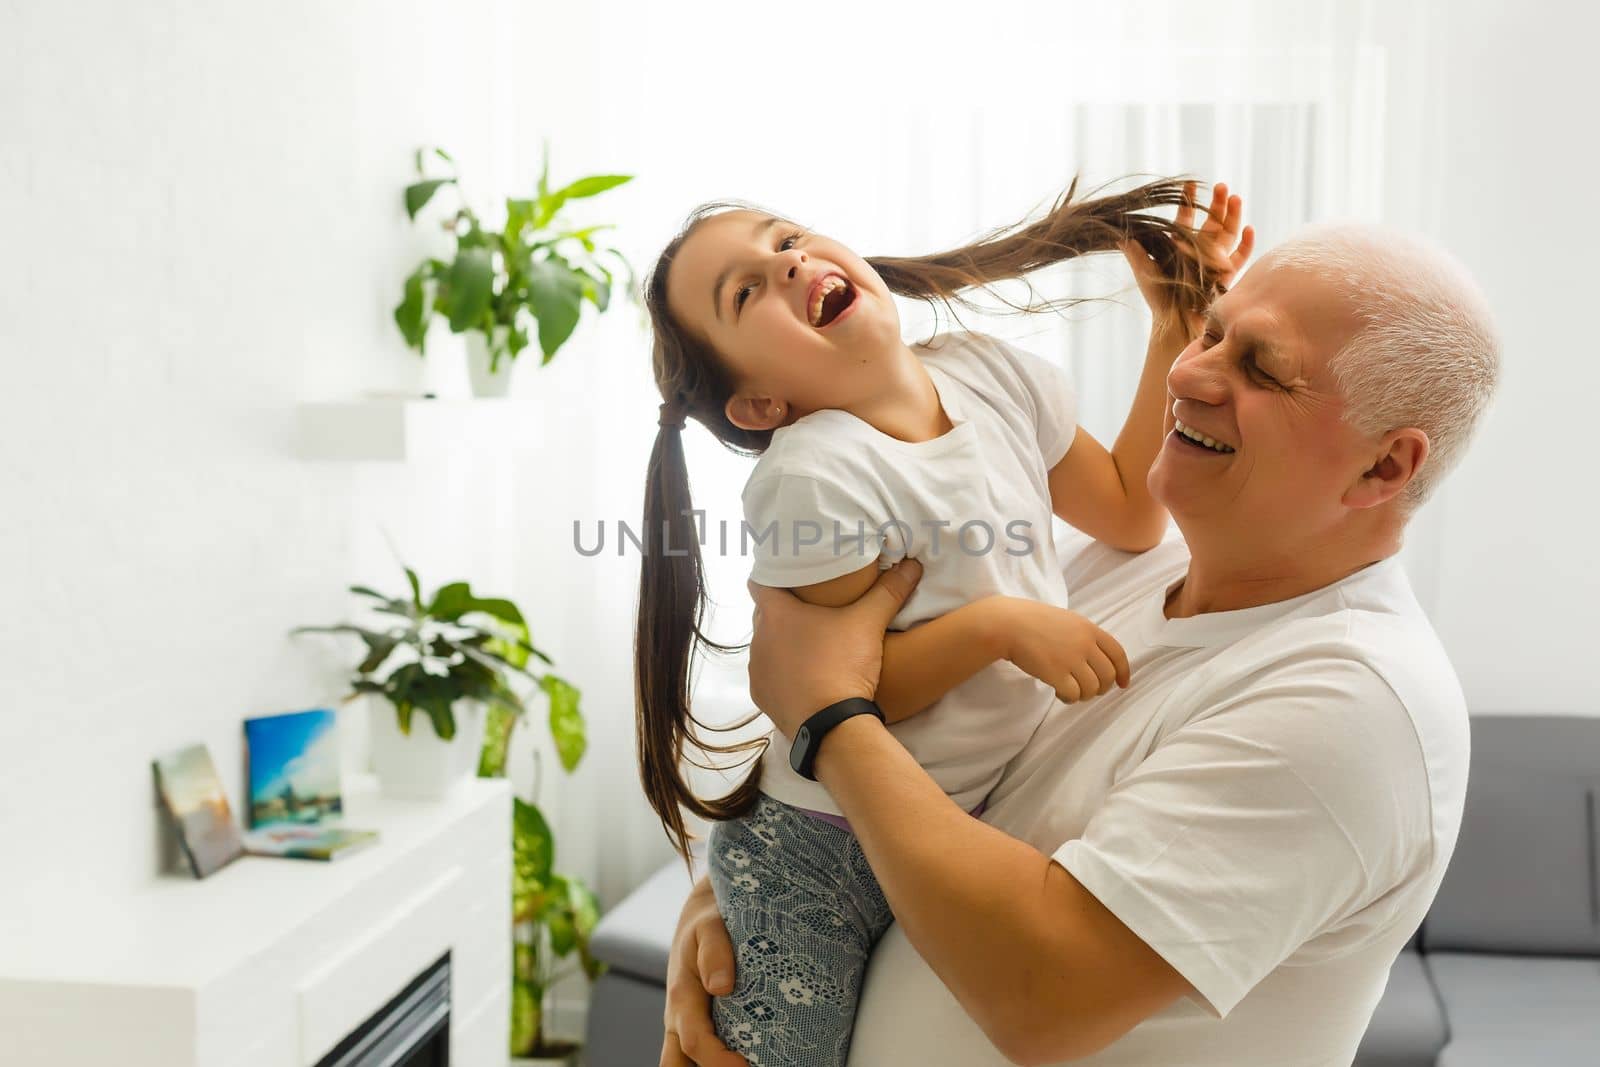 Middle-aged caucasian man playing with a little girl on the river bank. Man stands astoop ans holds his granddaughter on his back as she is "flying" Everybody's happy